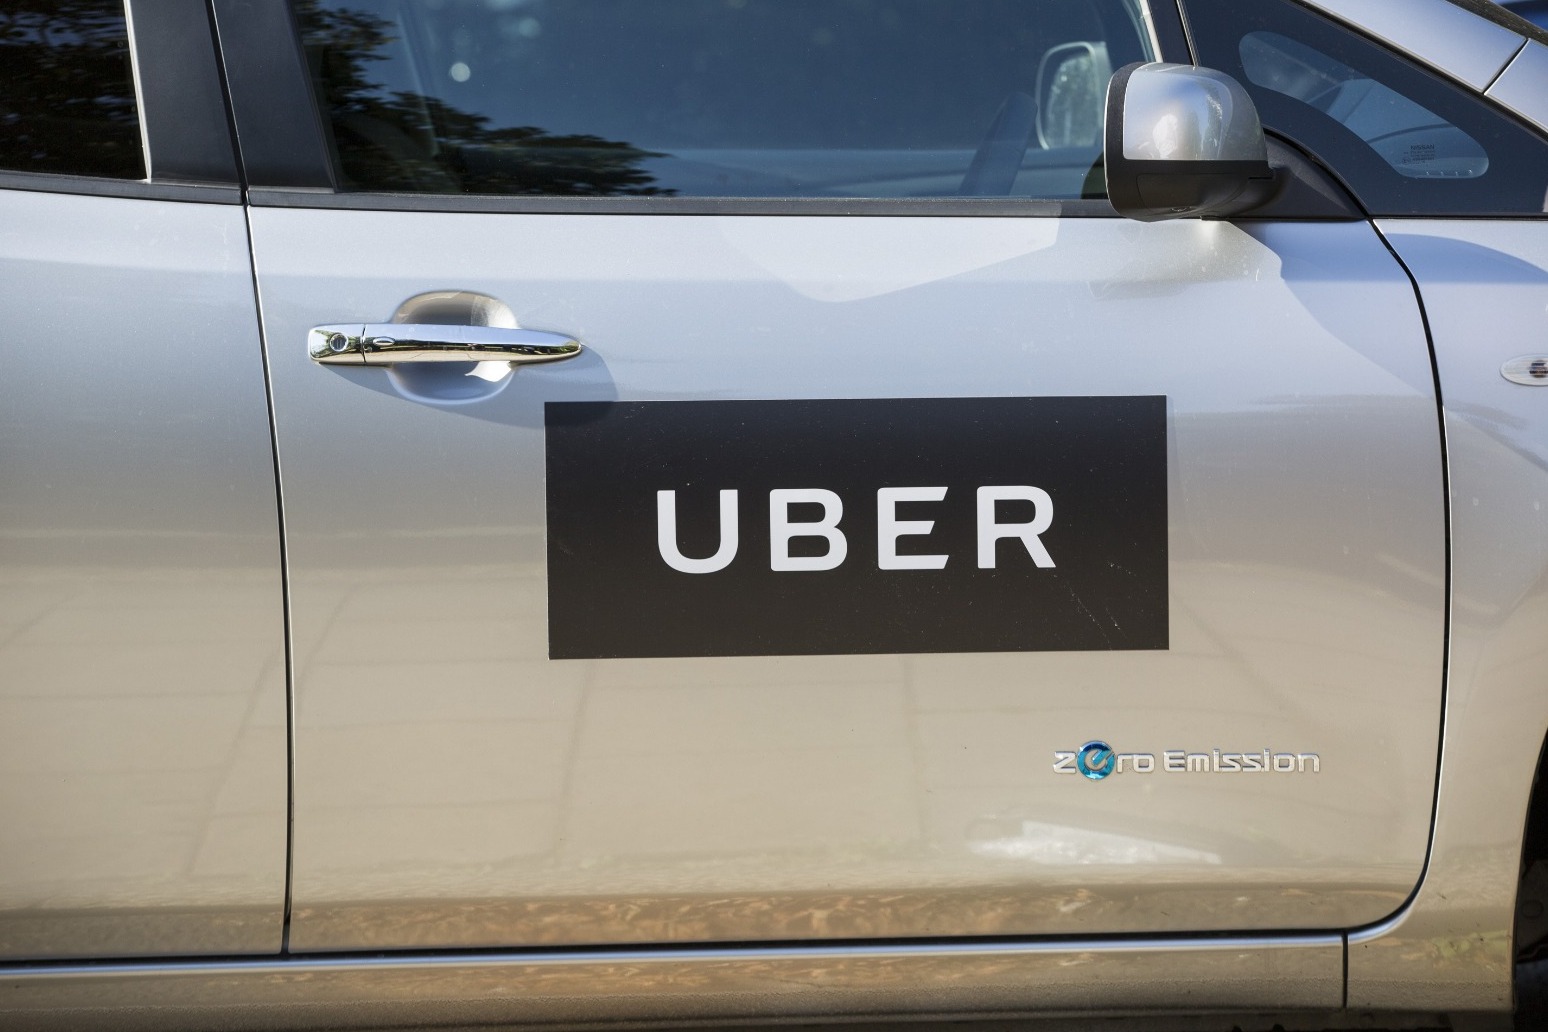 Uber secretly lobbied ministers to influence Londons transport policy  report